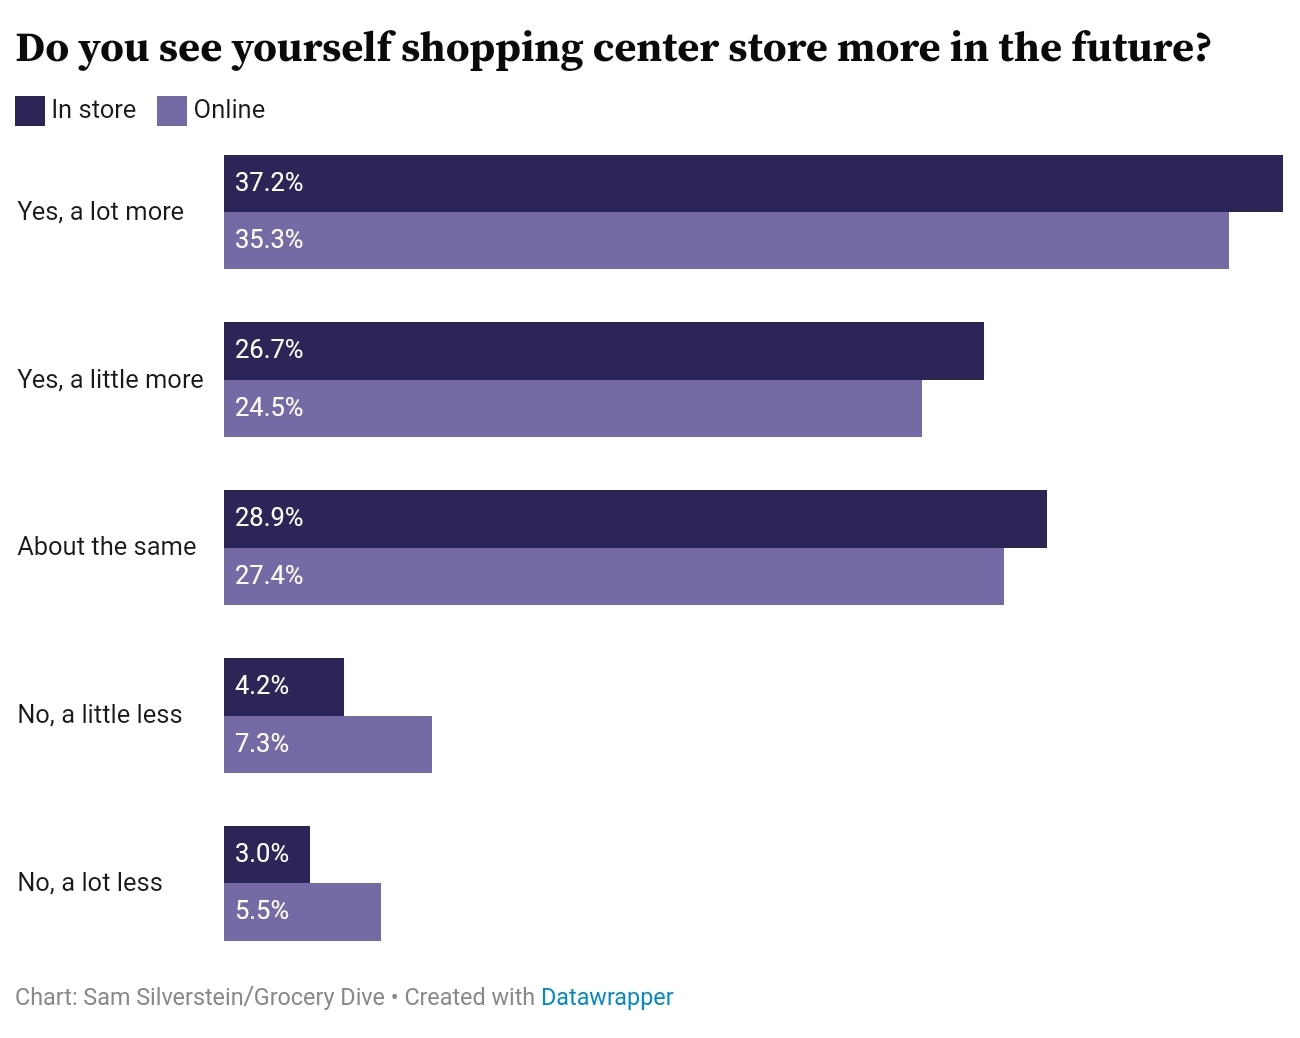 Chart showing future shopping at center stores